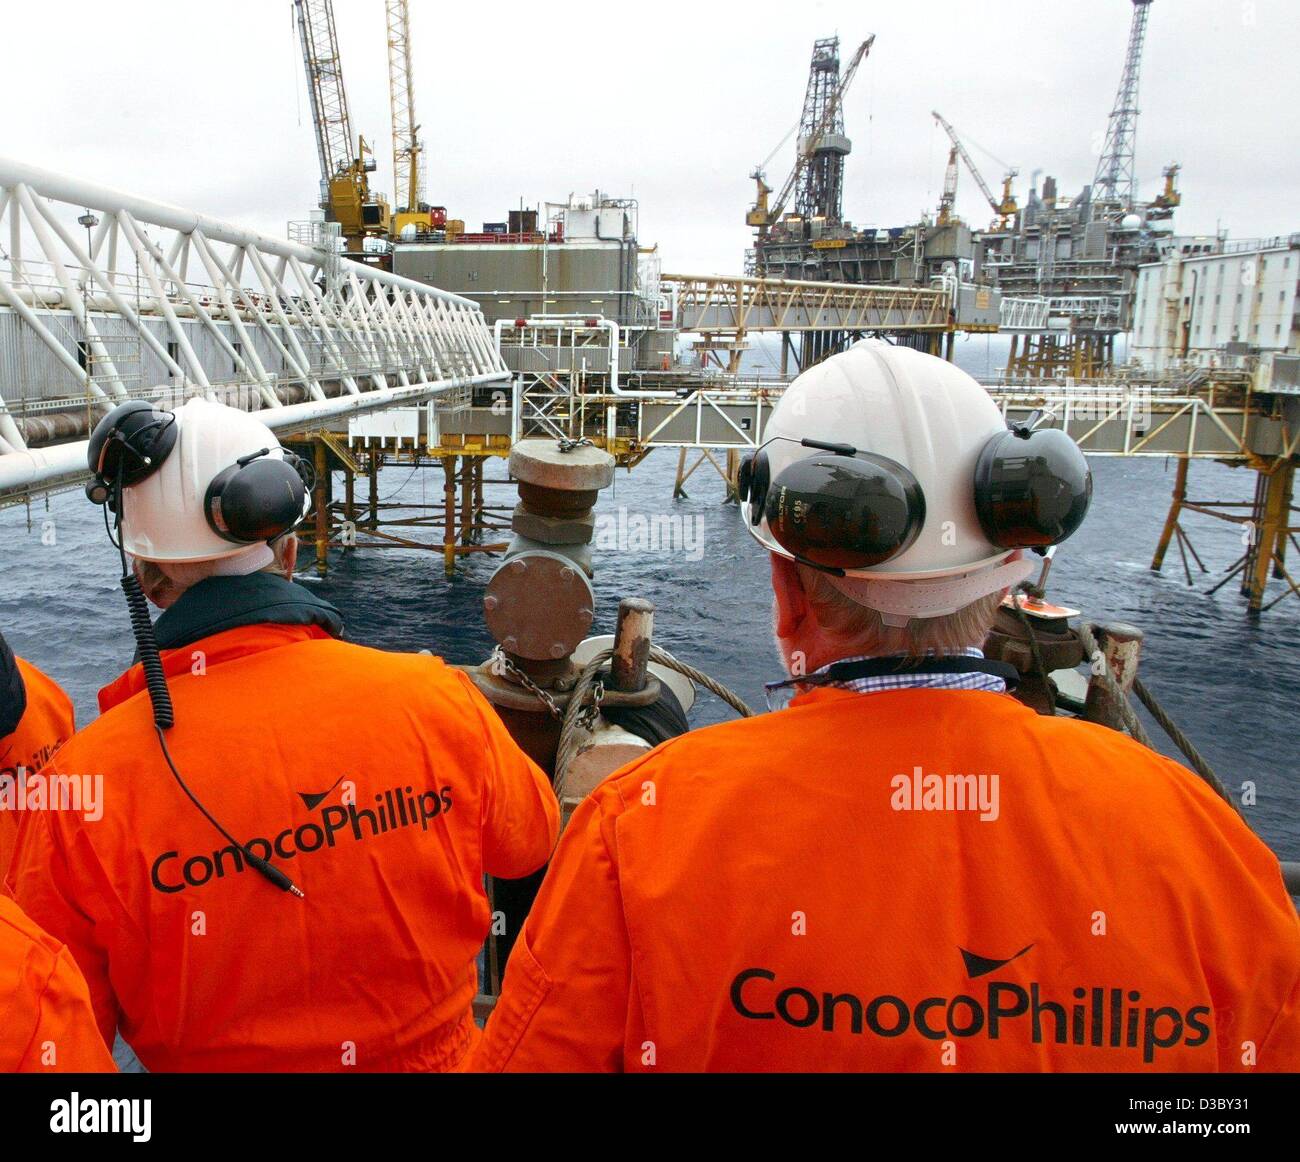 (dpa) - Workers stand on the gas and oil rig in the North Sea, about 250 km offshore of Stavanger, Norway, 5 July 2003. The platform belongs to the Ekofisk field complex, which comprises the oil and gas rigs Ekofisk, Eldfisk, Embla and Tor. The workers stay two weeks on the rig working 12 hour shift Stock Photo